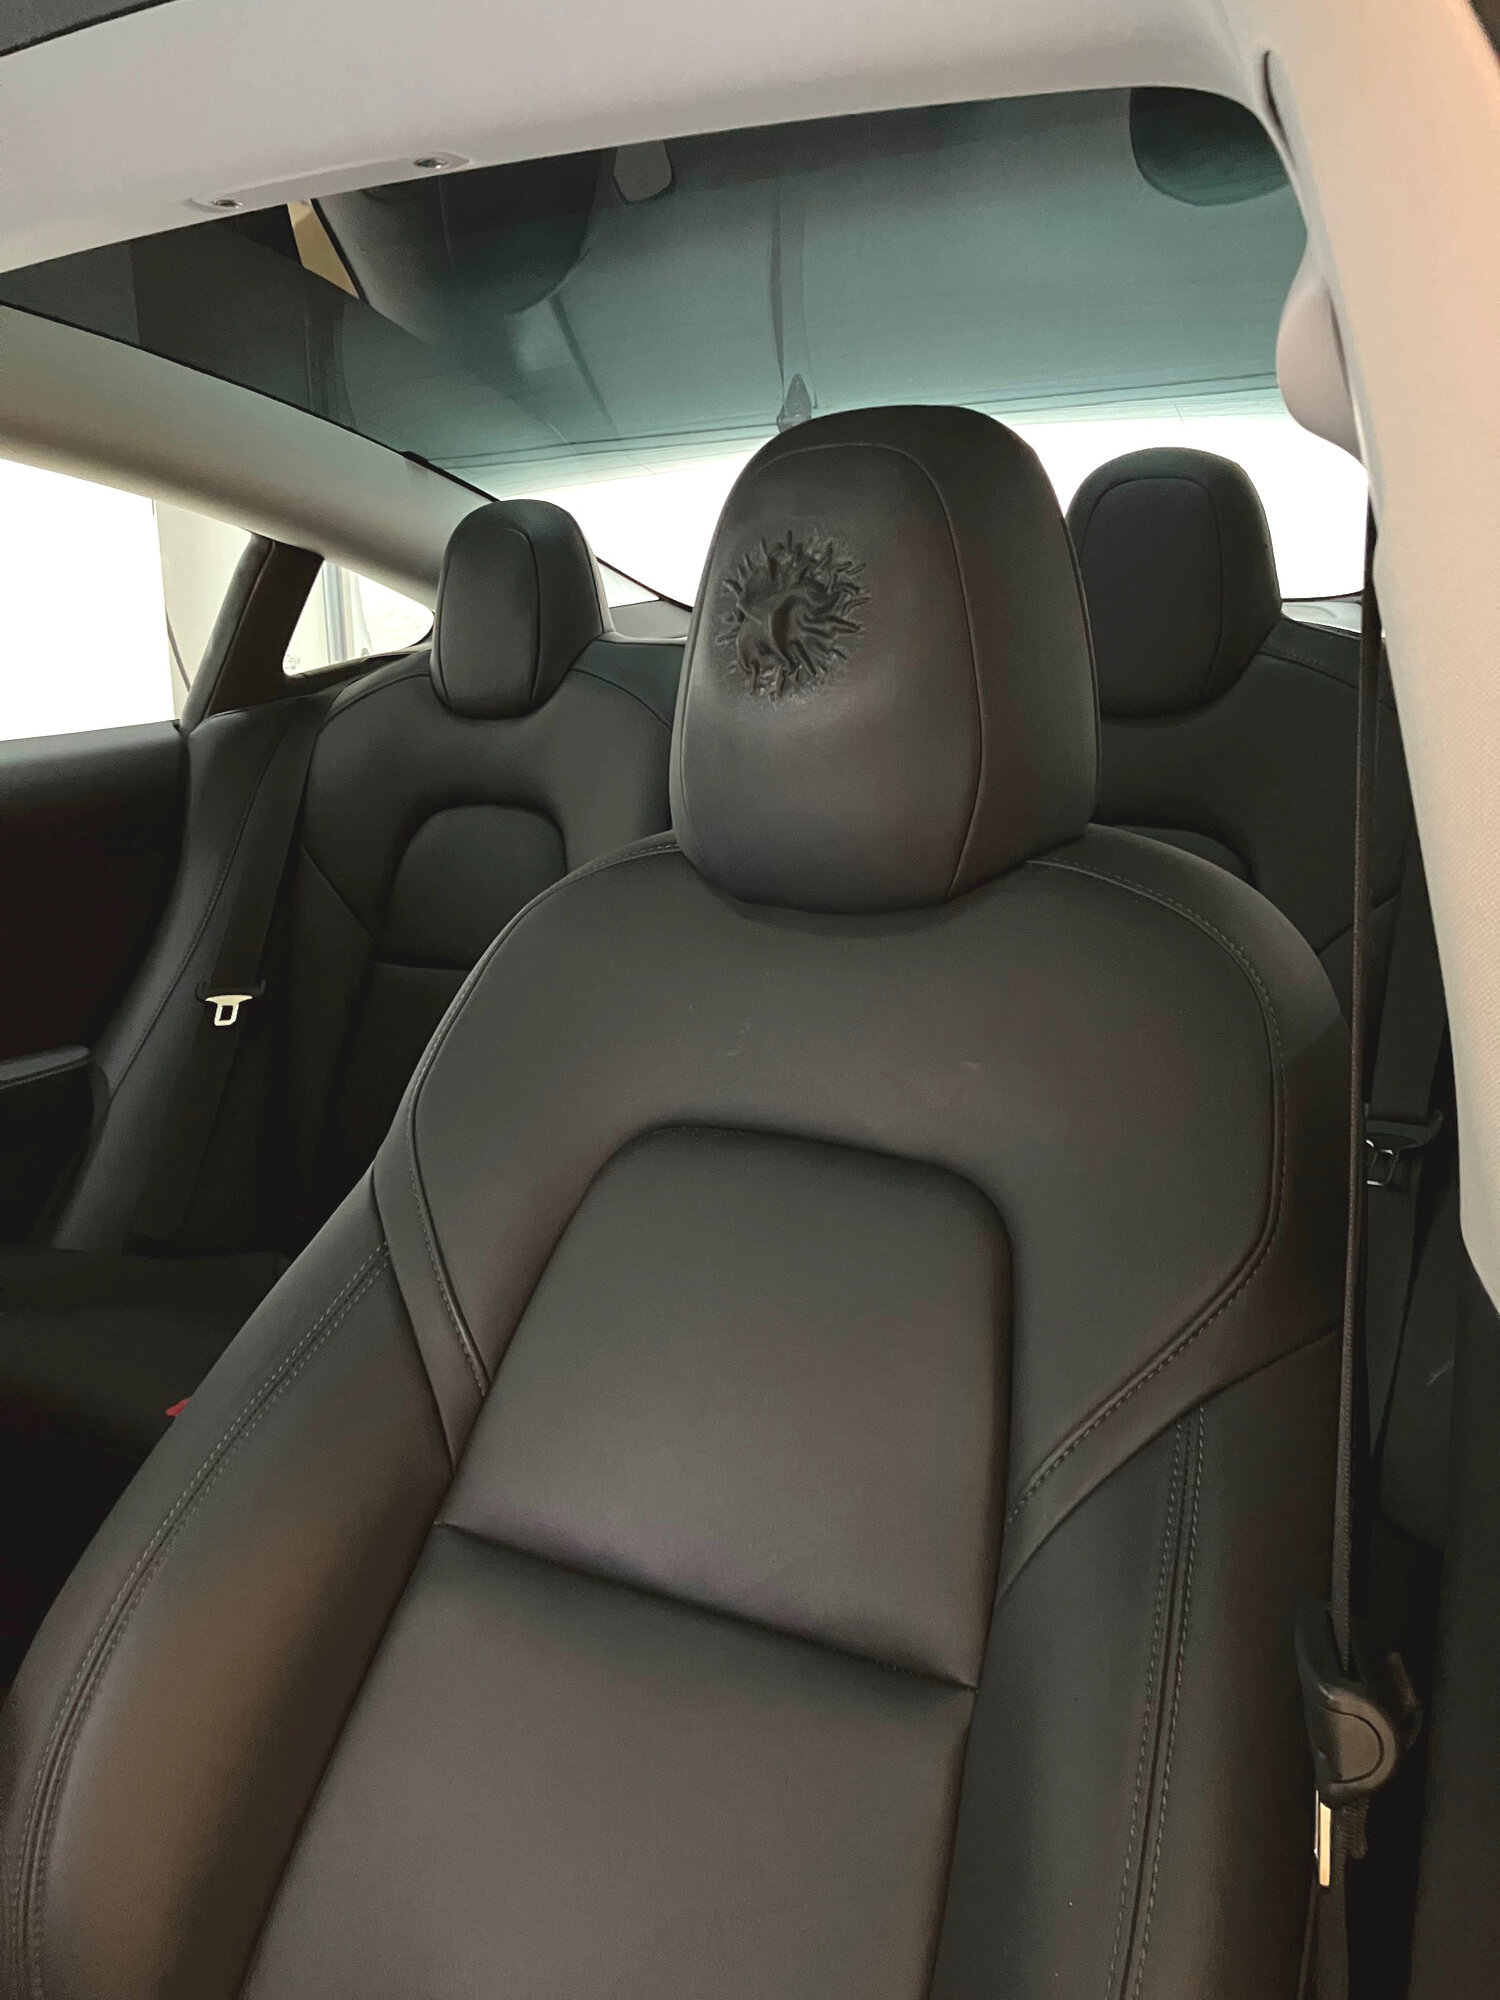 Bubble in headrest, Tesla might be caused by interior cleaner/conditioner, Page 3